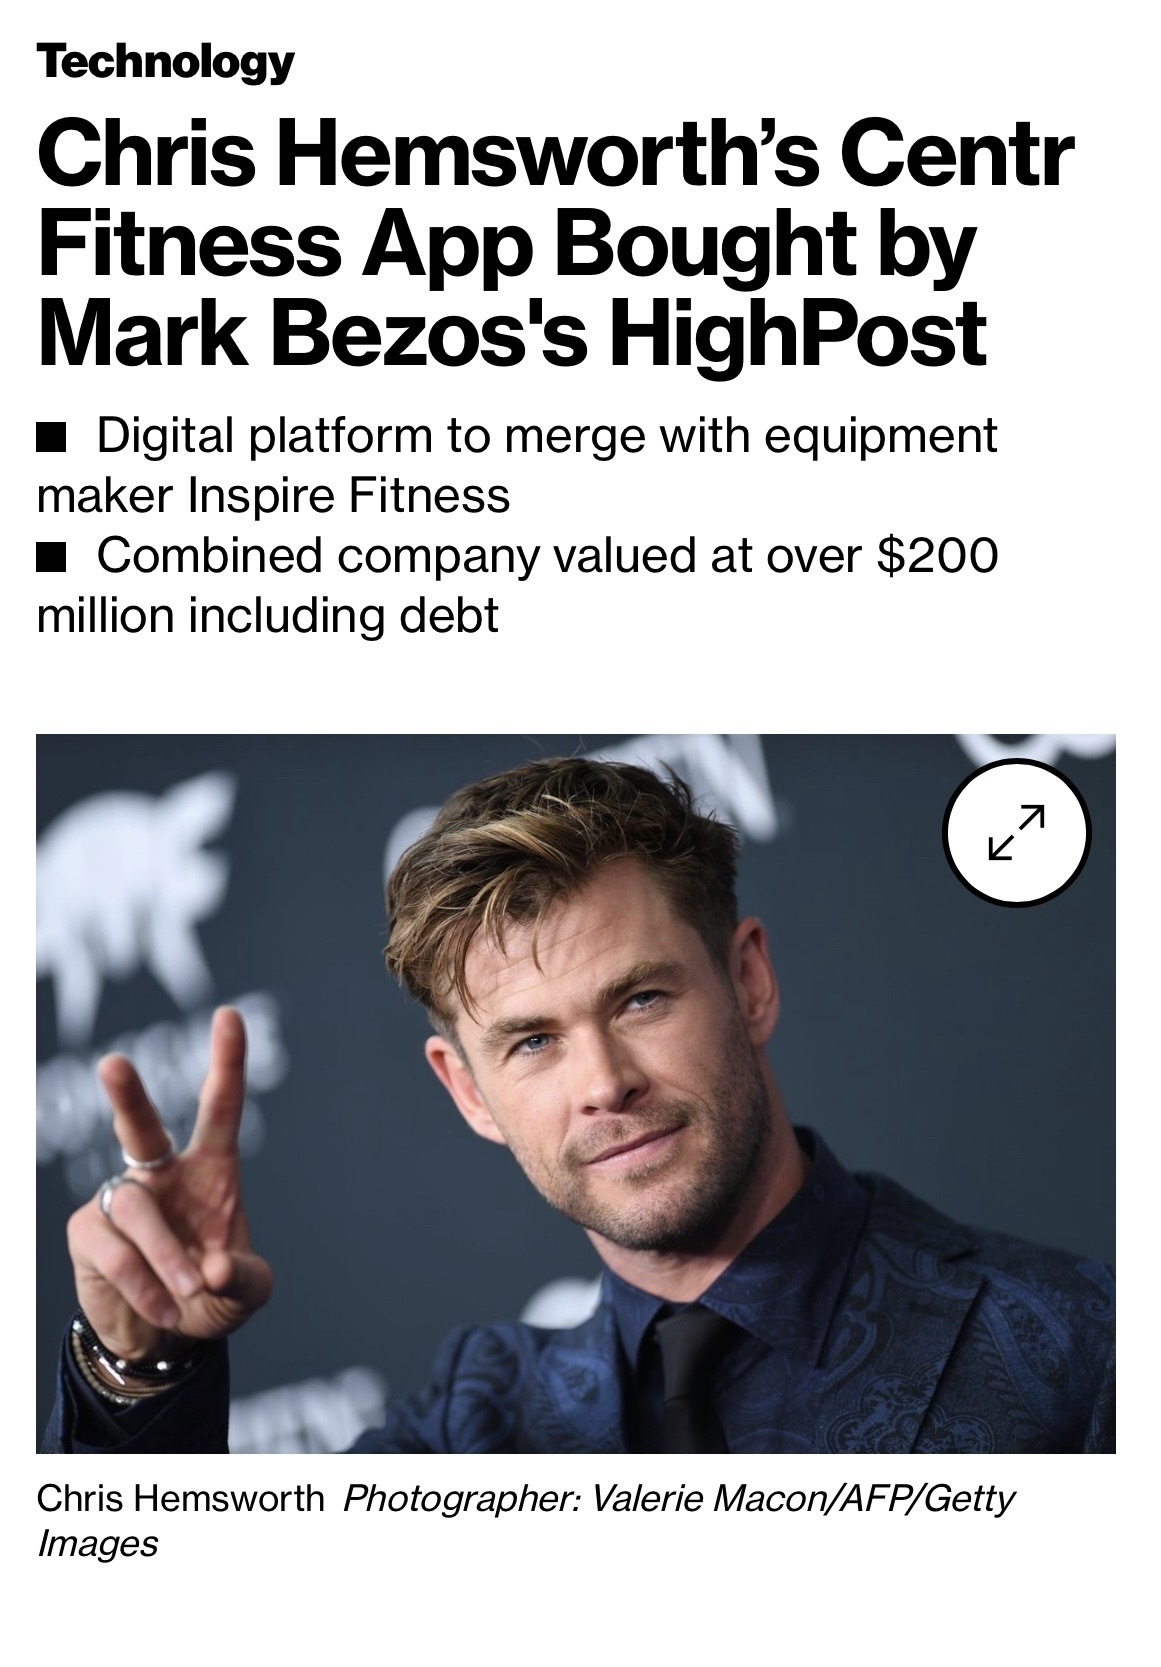 HighPost Capital Acquires Chris Hemsworth’s Centr & Inspire Fitness to Create Leading Personal Fitness, Nutrition & Wellness Platform